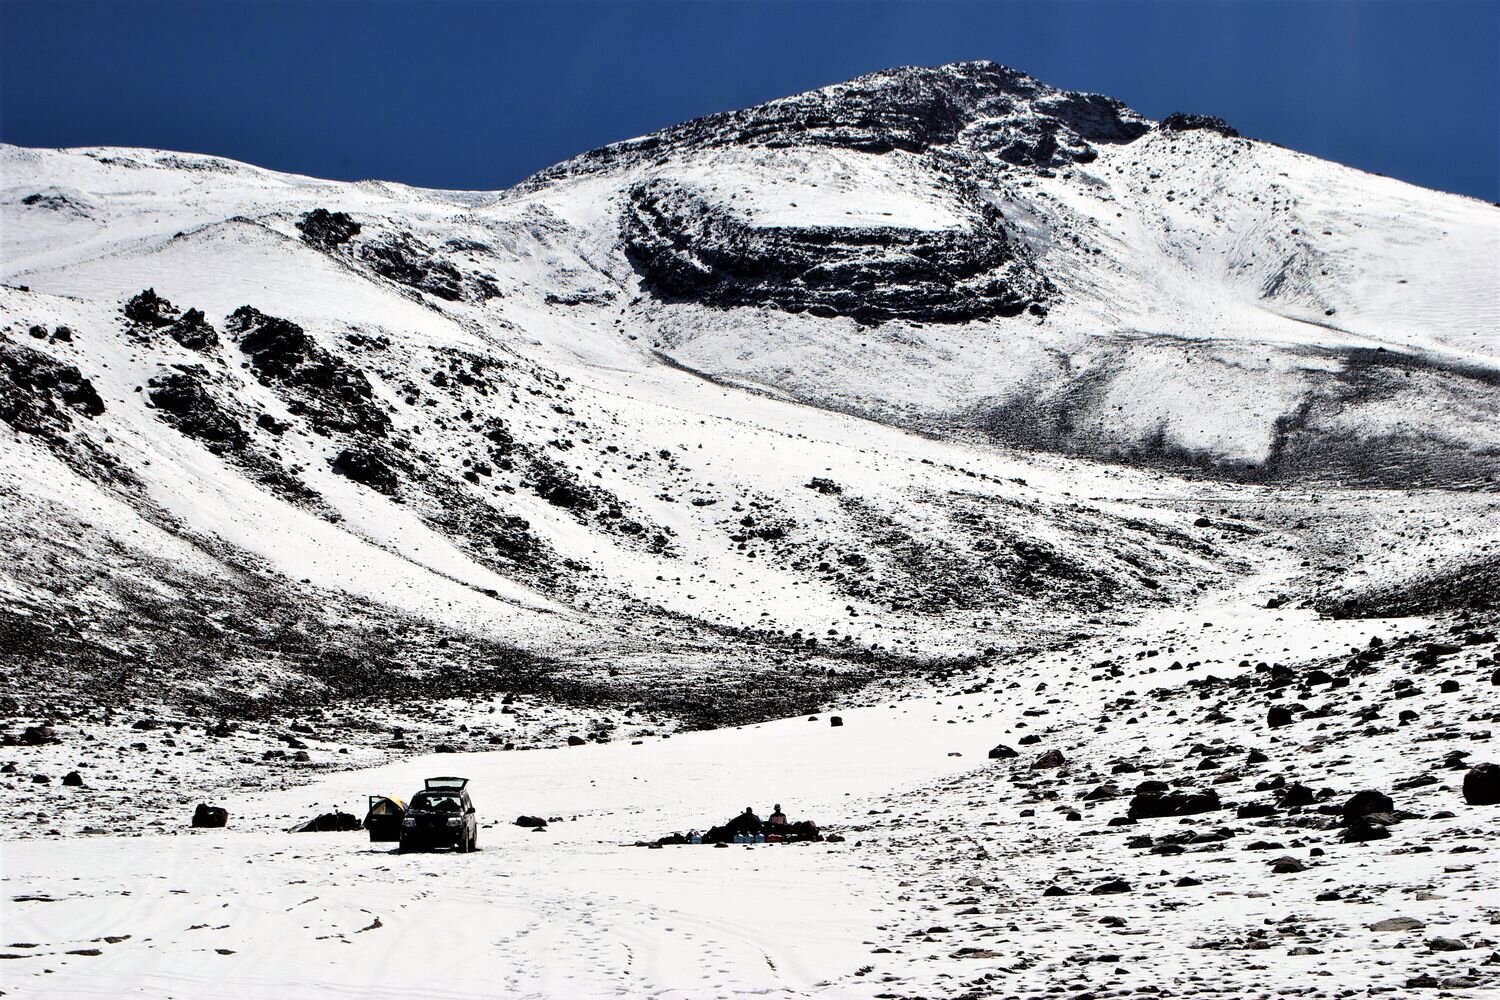  A close view of the Llullaillaco volcano right after a snowfall. Chilean Altiplano. 